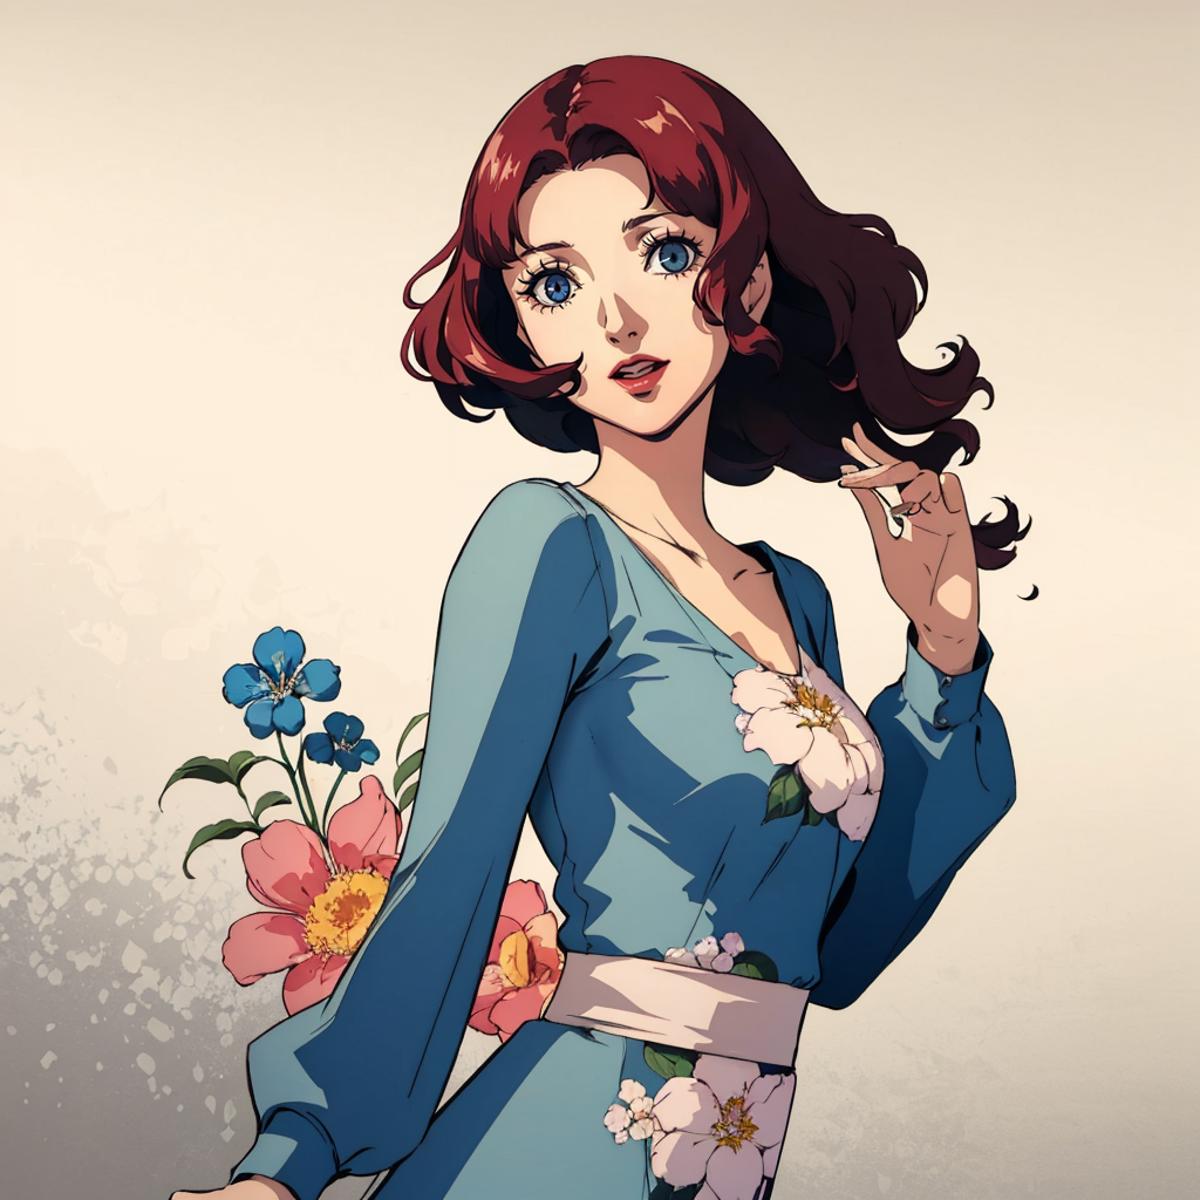 Anime Style Drawing of a Woman with Flowers in Her Hair and Blue Eyes.